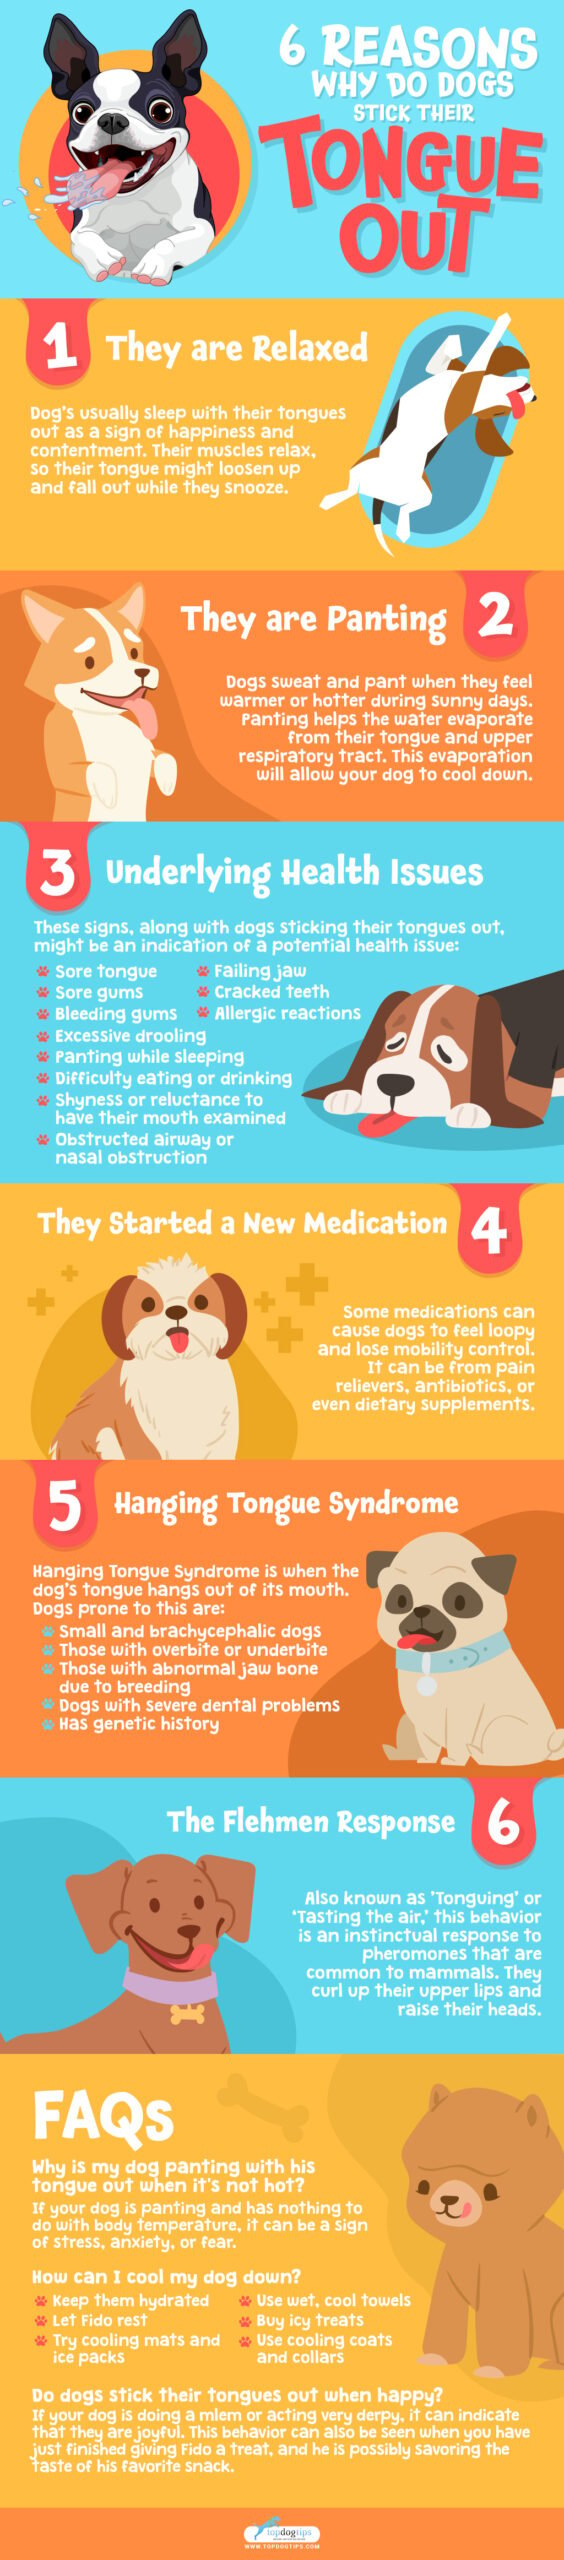 6 Reasons Why Do Dogs Stick Their Tongue Out - Infographics